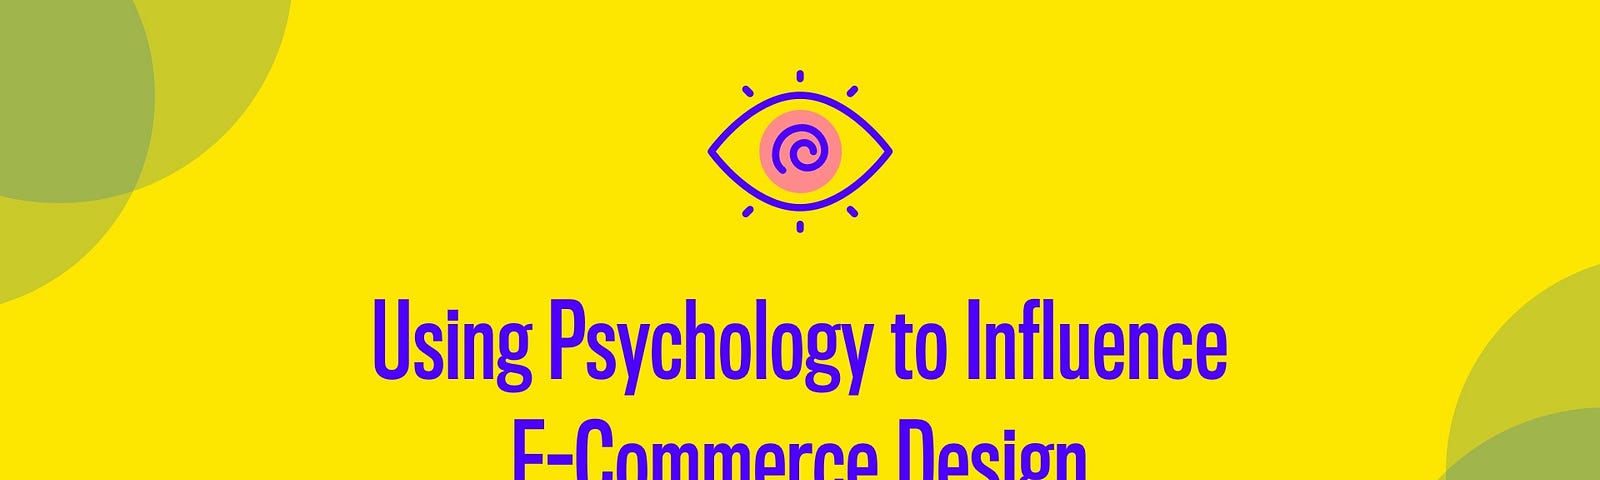 Using Psychology to Influence E-Commerce Design